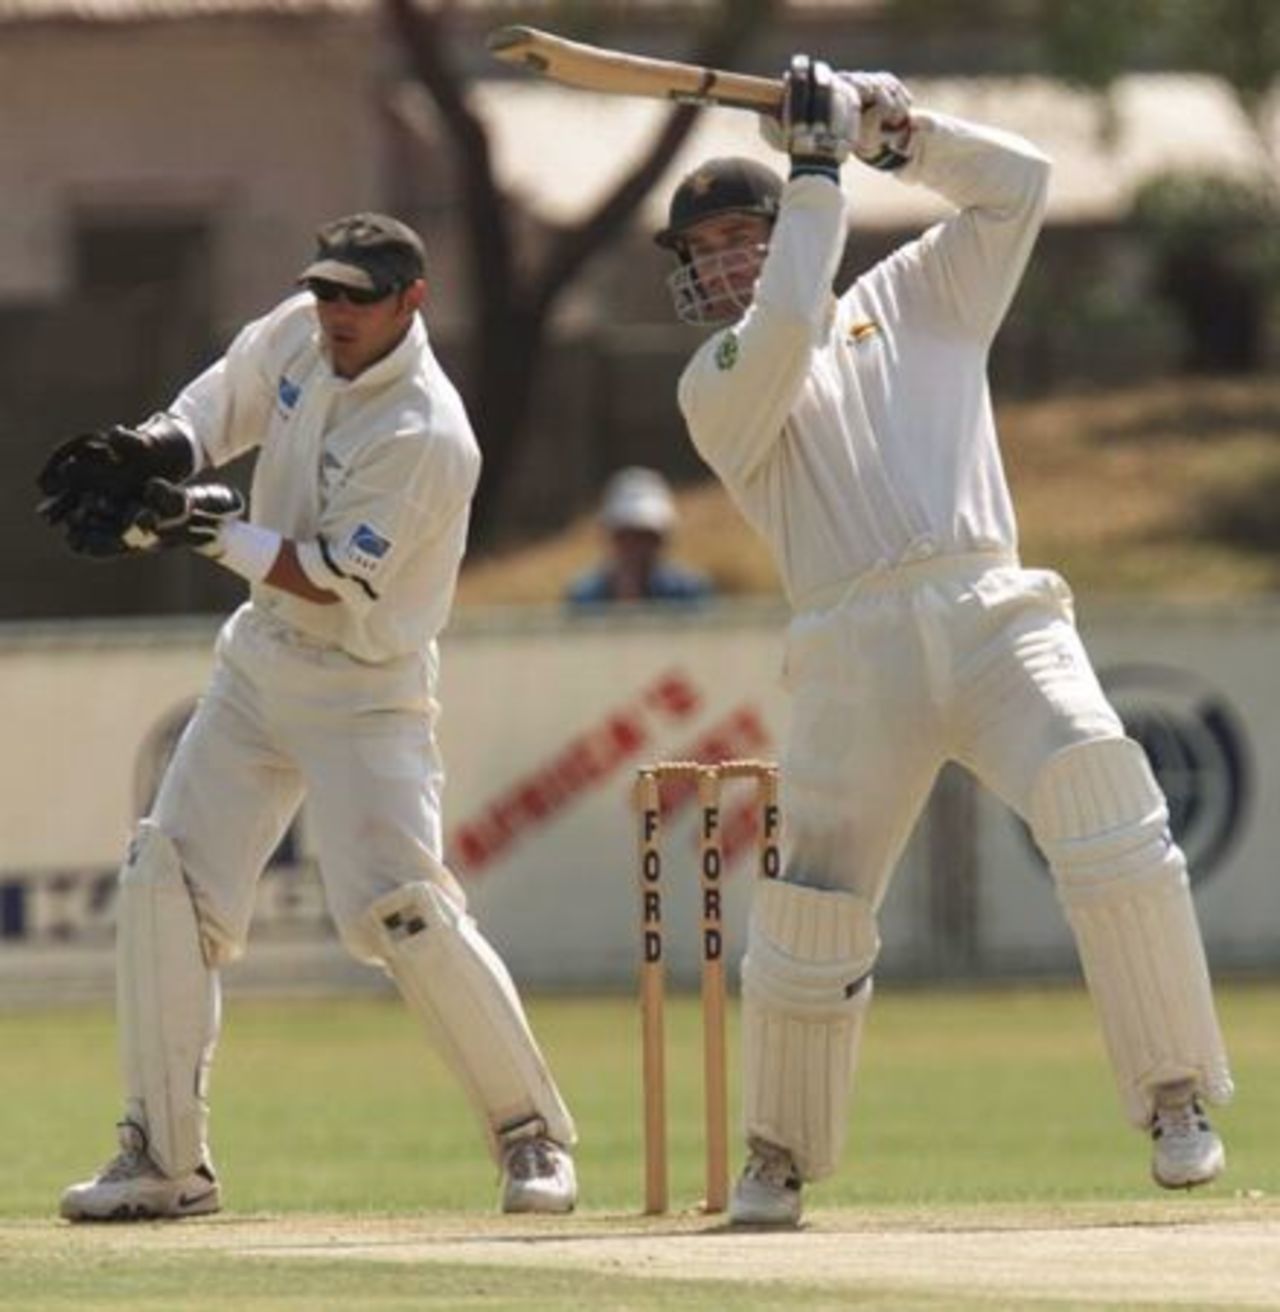 Parore looks on as Wishart plays to off-side, 1st Test Zimbabwe v New Zealand, 13 Sep 2000